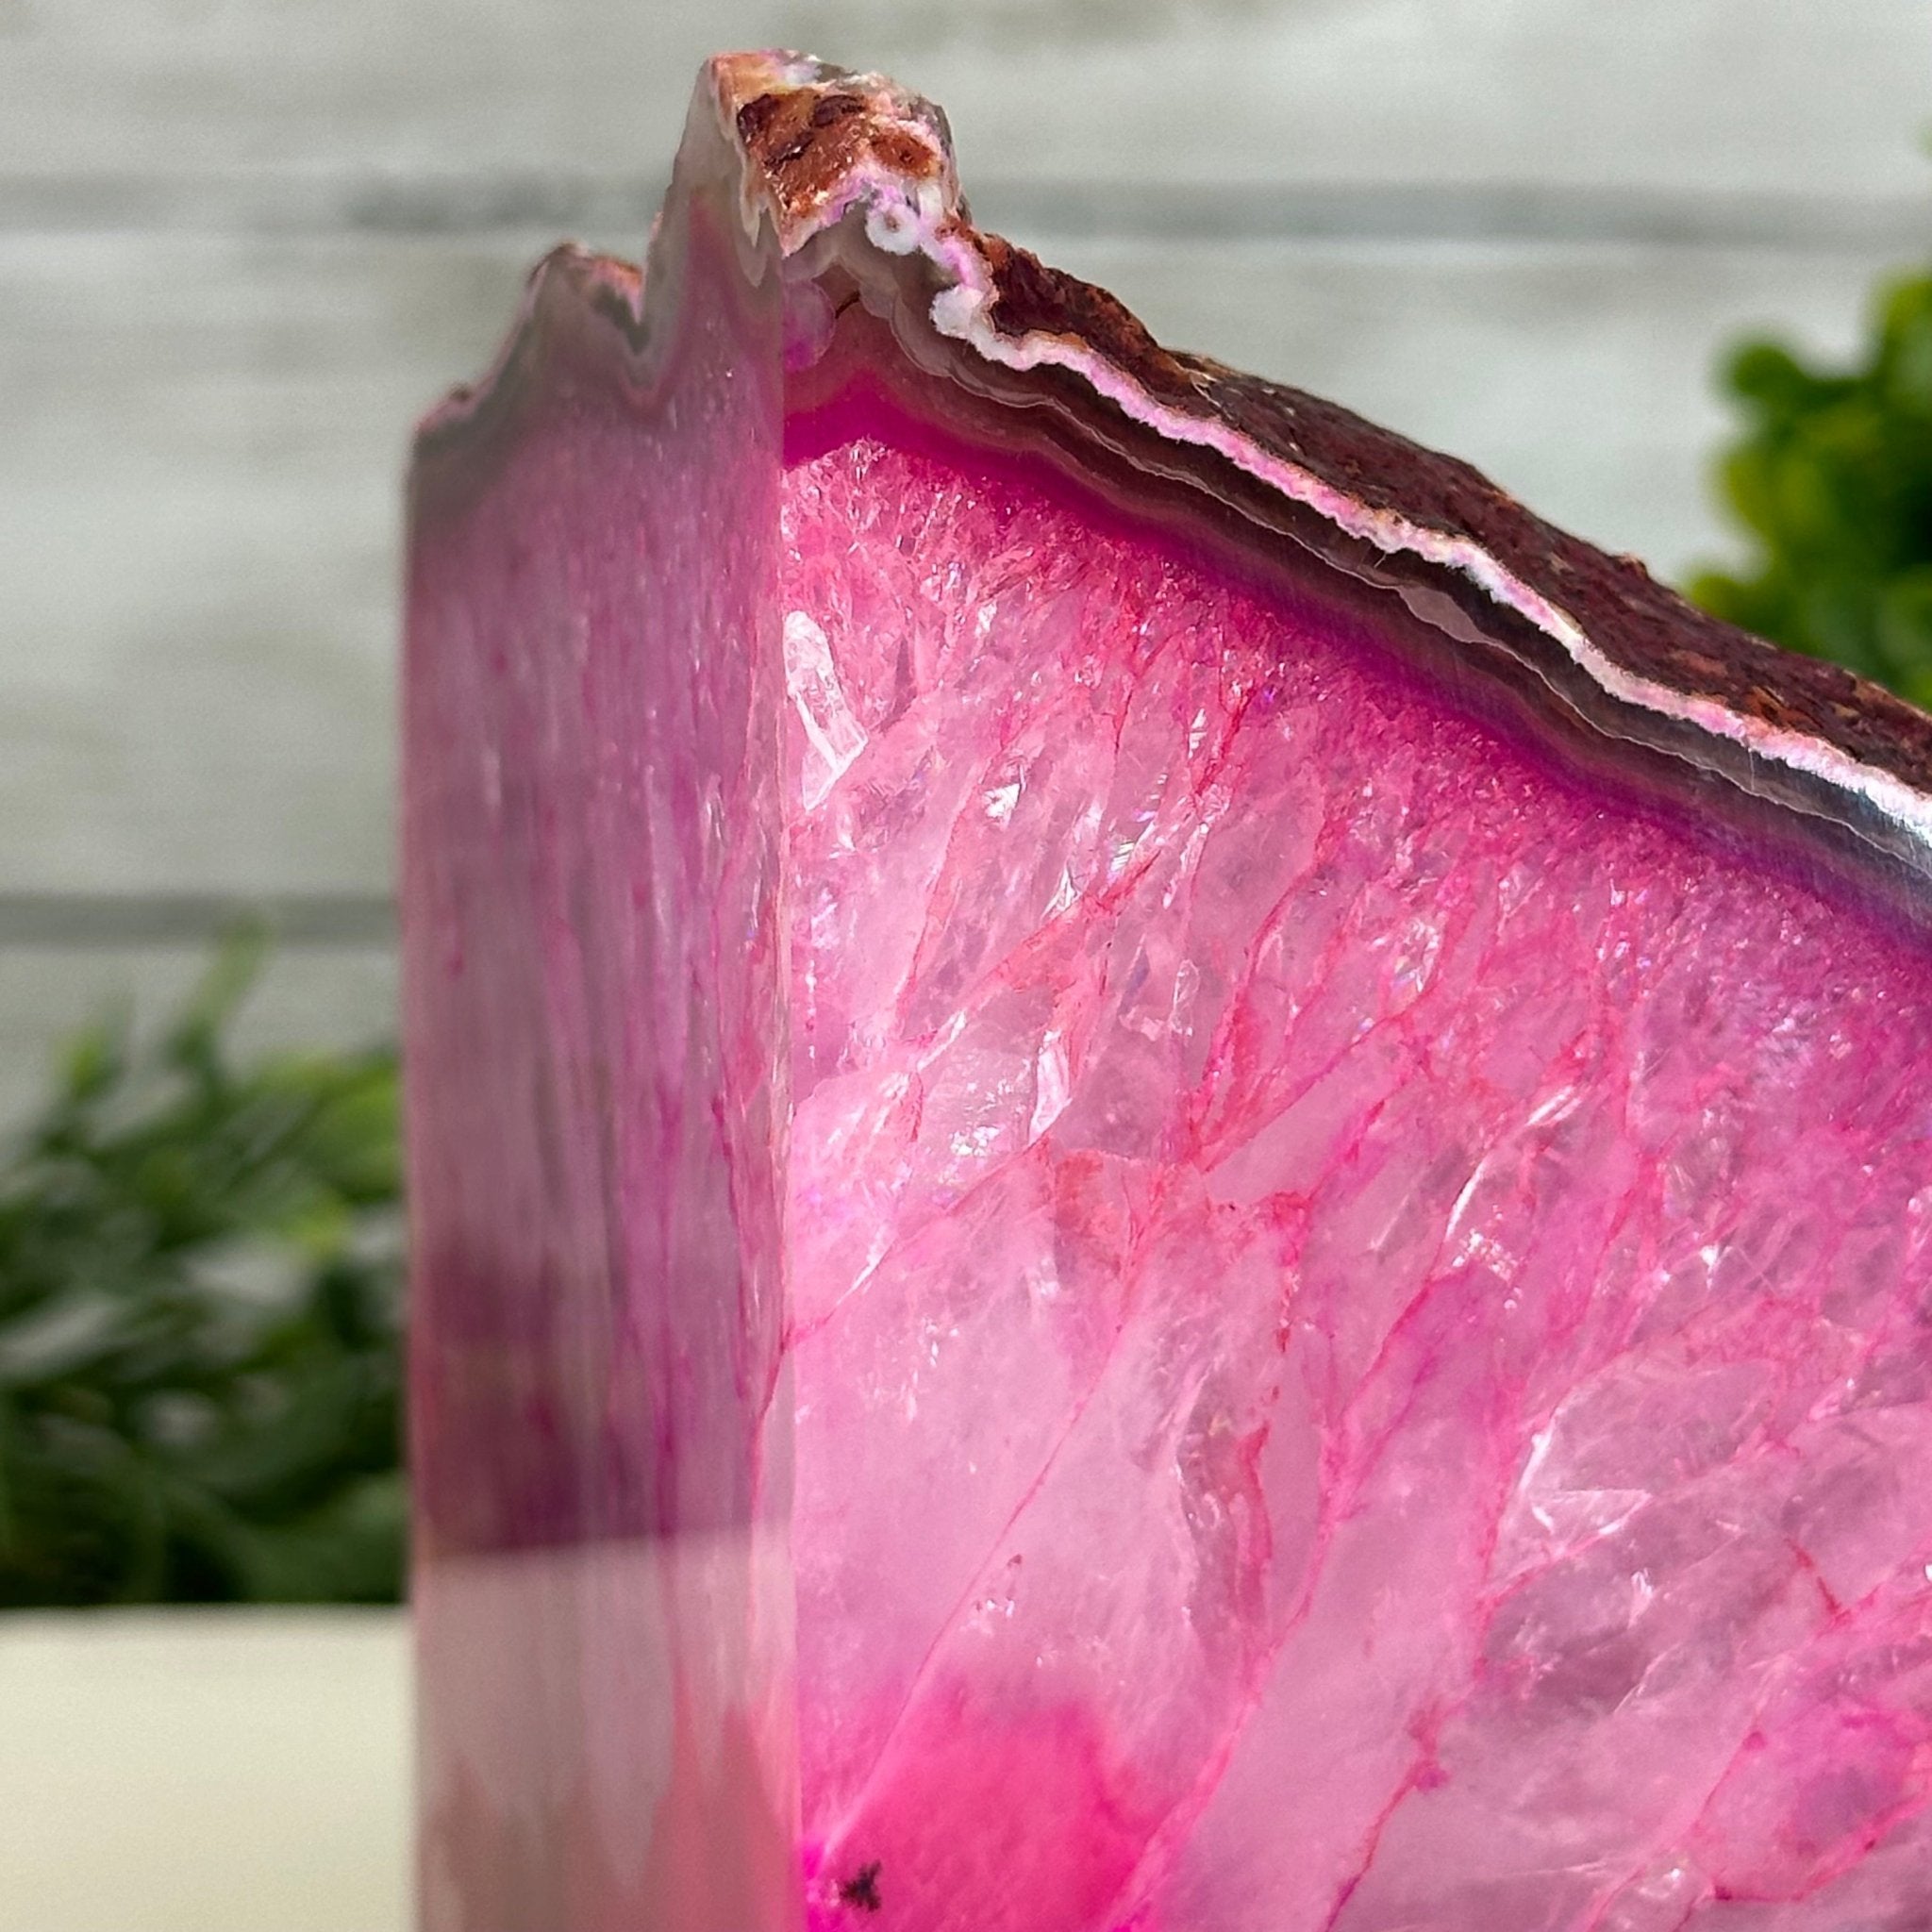 Pink Dyed Brazilian Agate Stone Bookends, 9.6 lbs & 5.4" tall #5151PA-028 - Brazil GemsBrazil GemsPink Dyed Brazilian Agate Stone Bookends, 9.6 lbs & 5.4" tall #5151PA-028Bookends5151PA-028